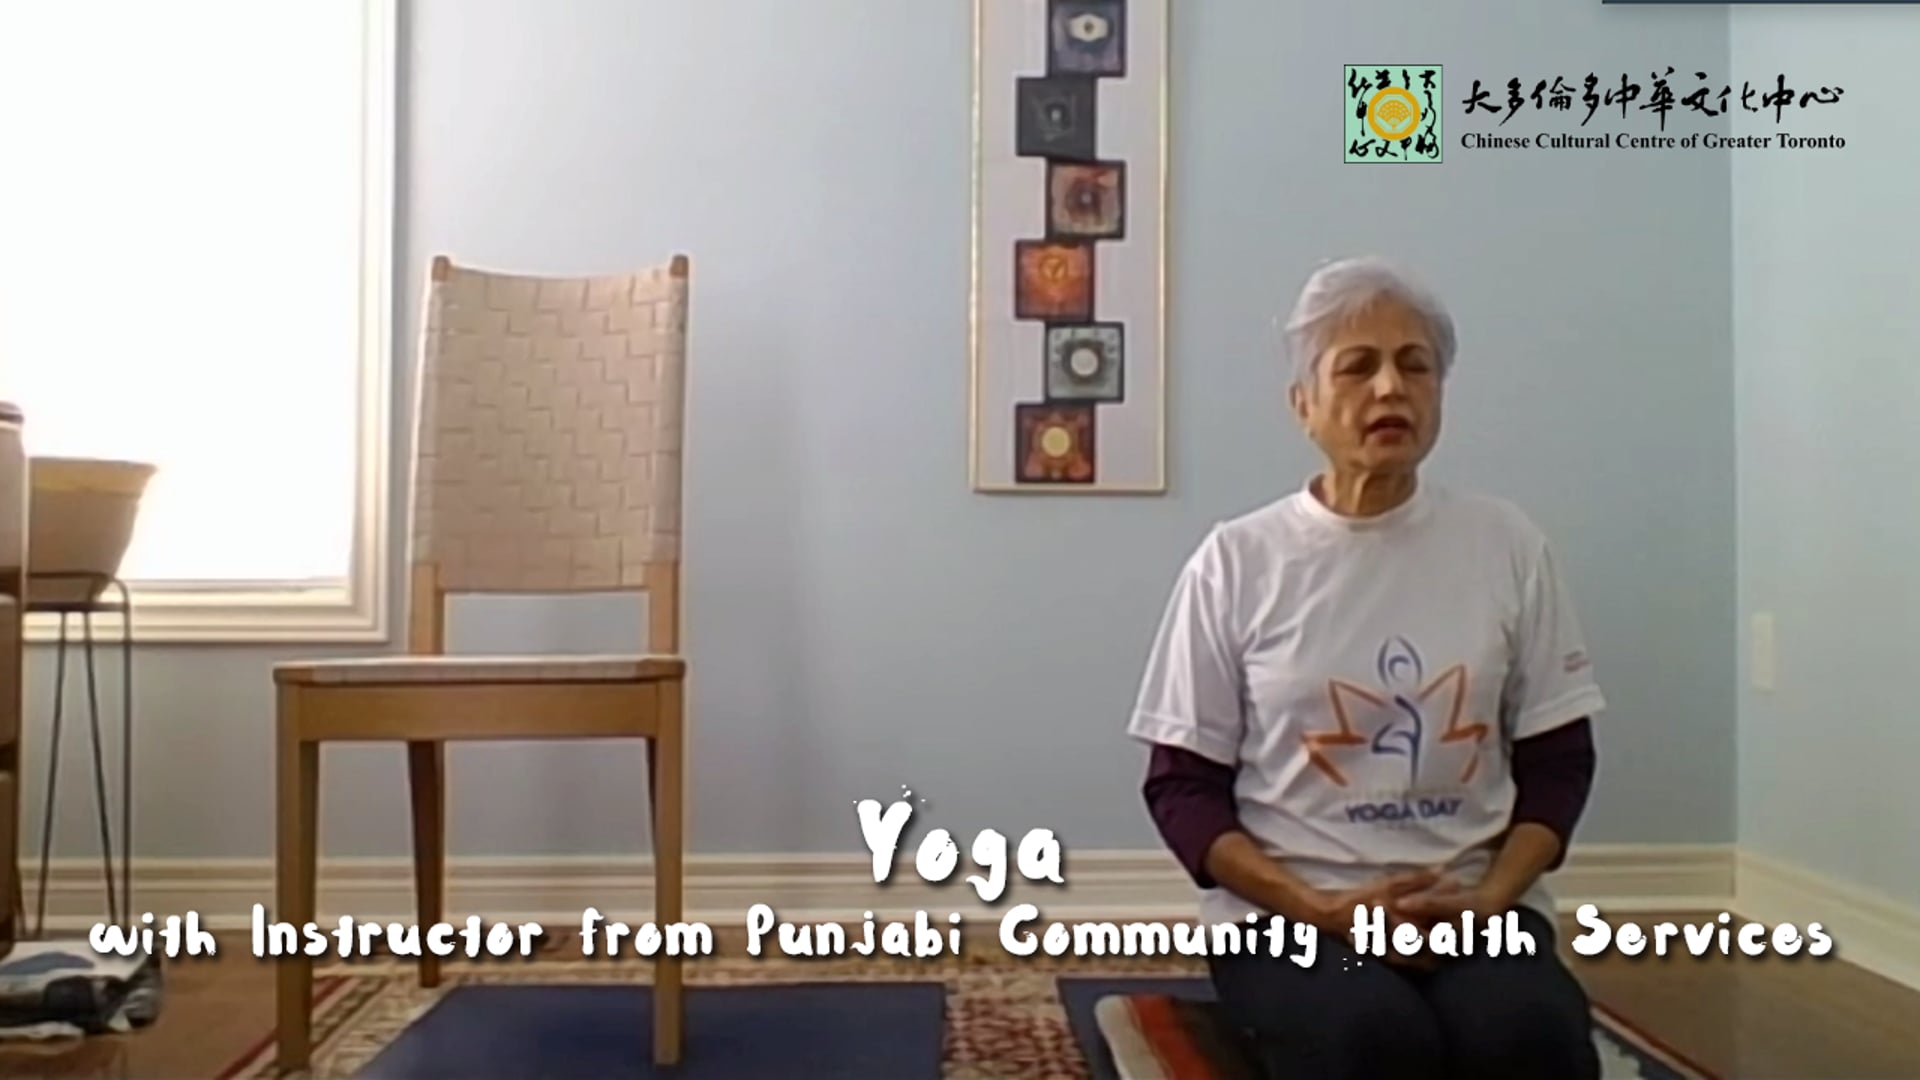 Yoga - Instructor from Punjabi Community Health Services in Scarborough | CCC Connect